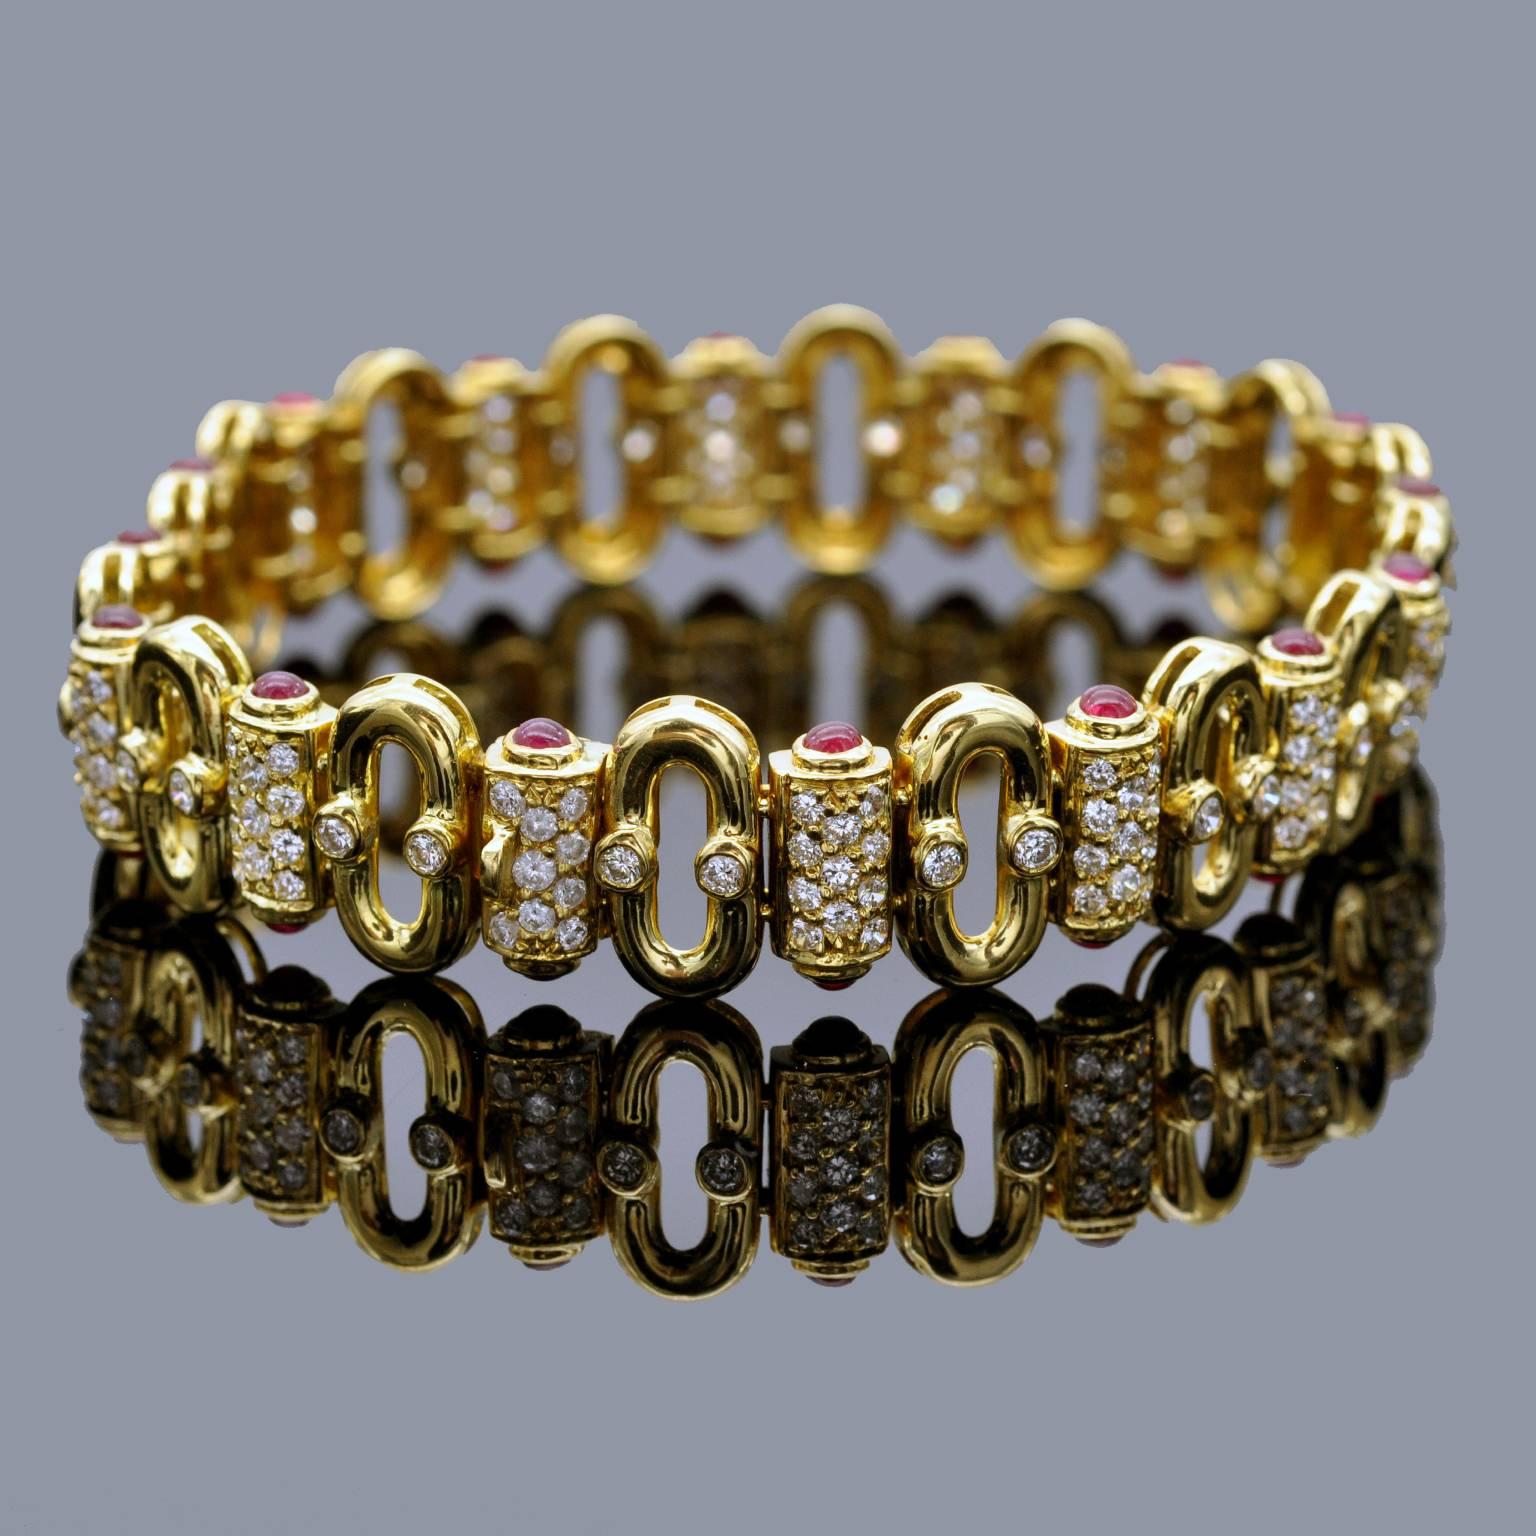 Stylish 18Kt yellow-gold link bracelet set with ruby cabochons and round brilliant cut diamonds.
Bracelet details:
Ruby: ± 3carat
Diamonds: ± 3.20 carat
Bearing 18 Karat Gold french state stamp 